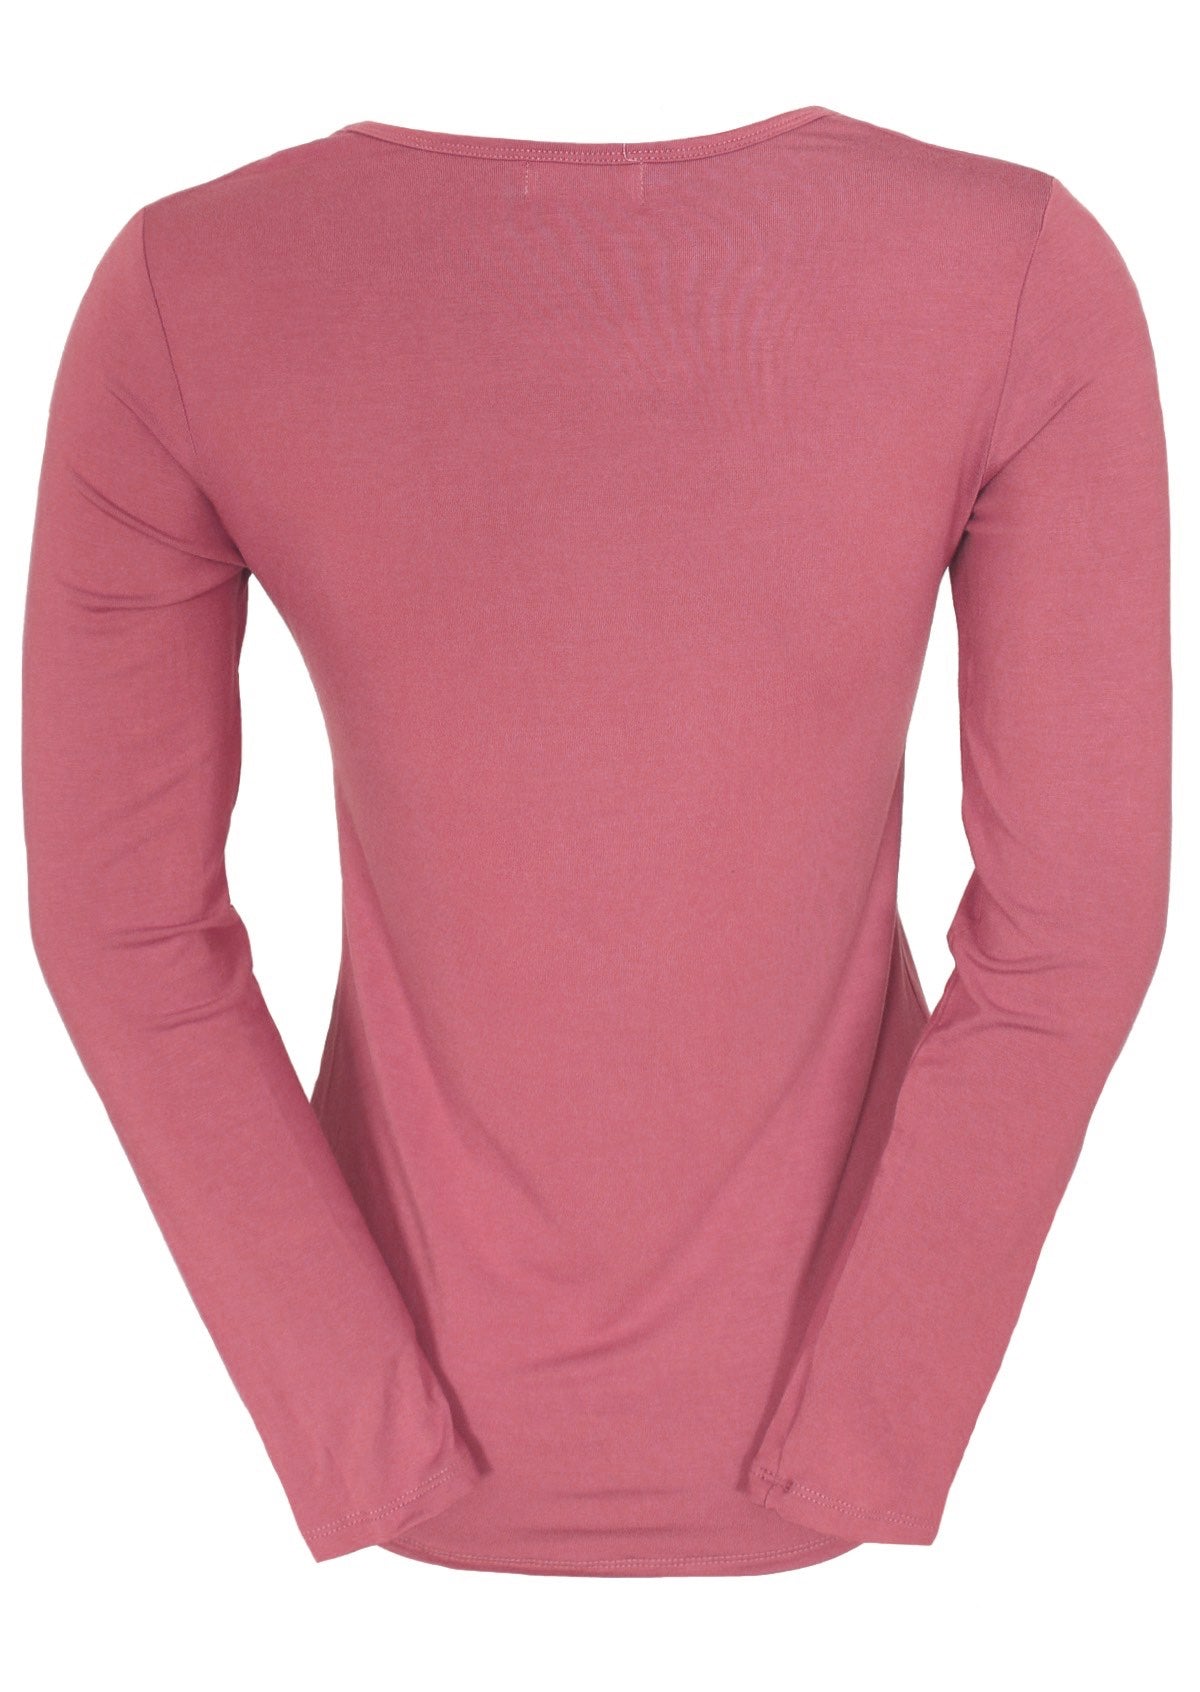 Pink long sleeve stretch rayon top